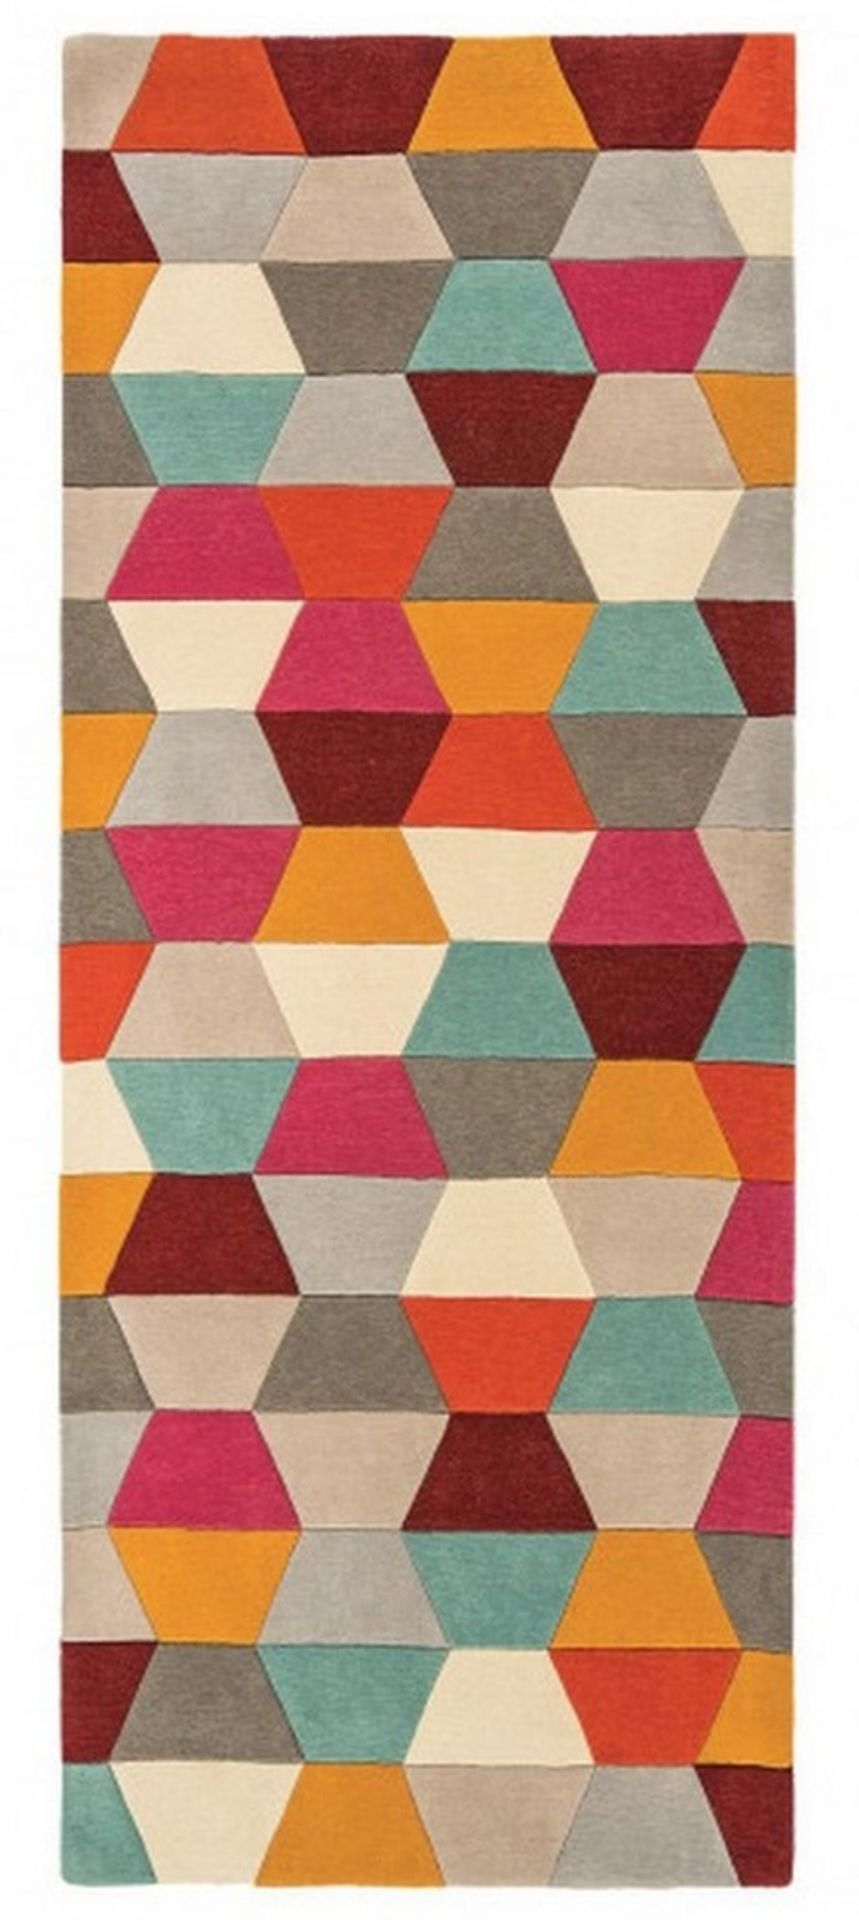 1 x Funk Honeycomb Bright Colourful Modern Hallway Runners - 100% New Zealand Wool - Handmade In - Image 5 of 6